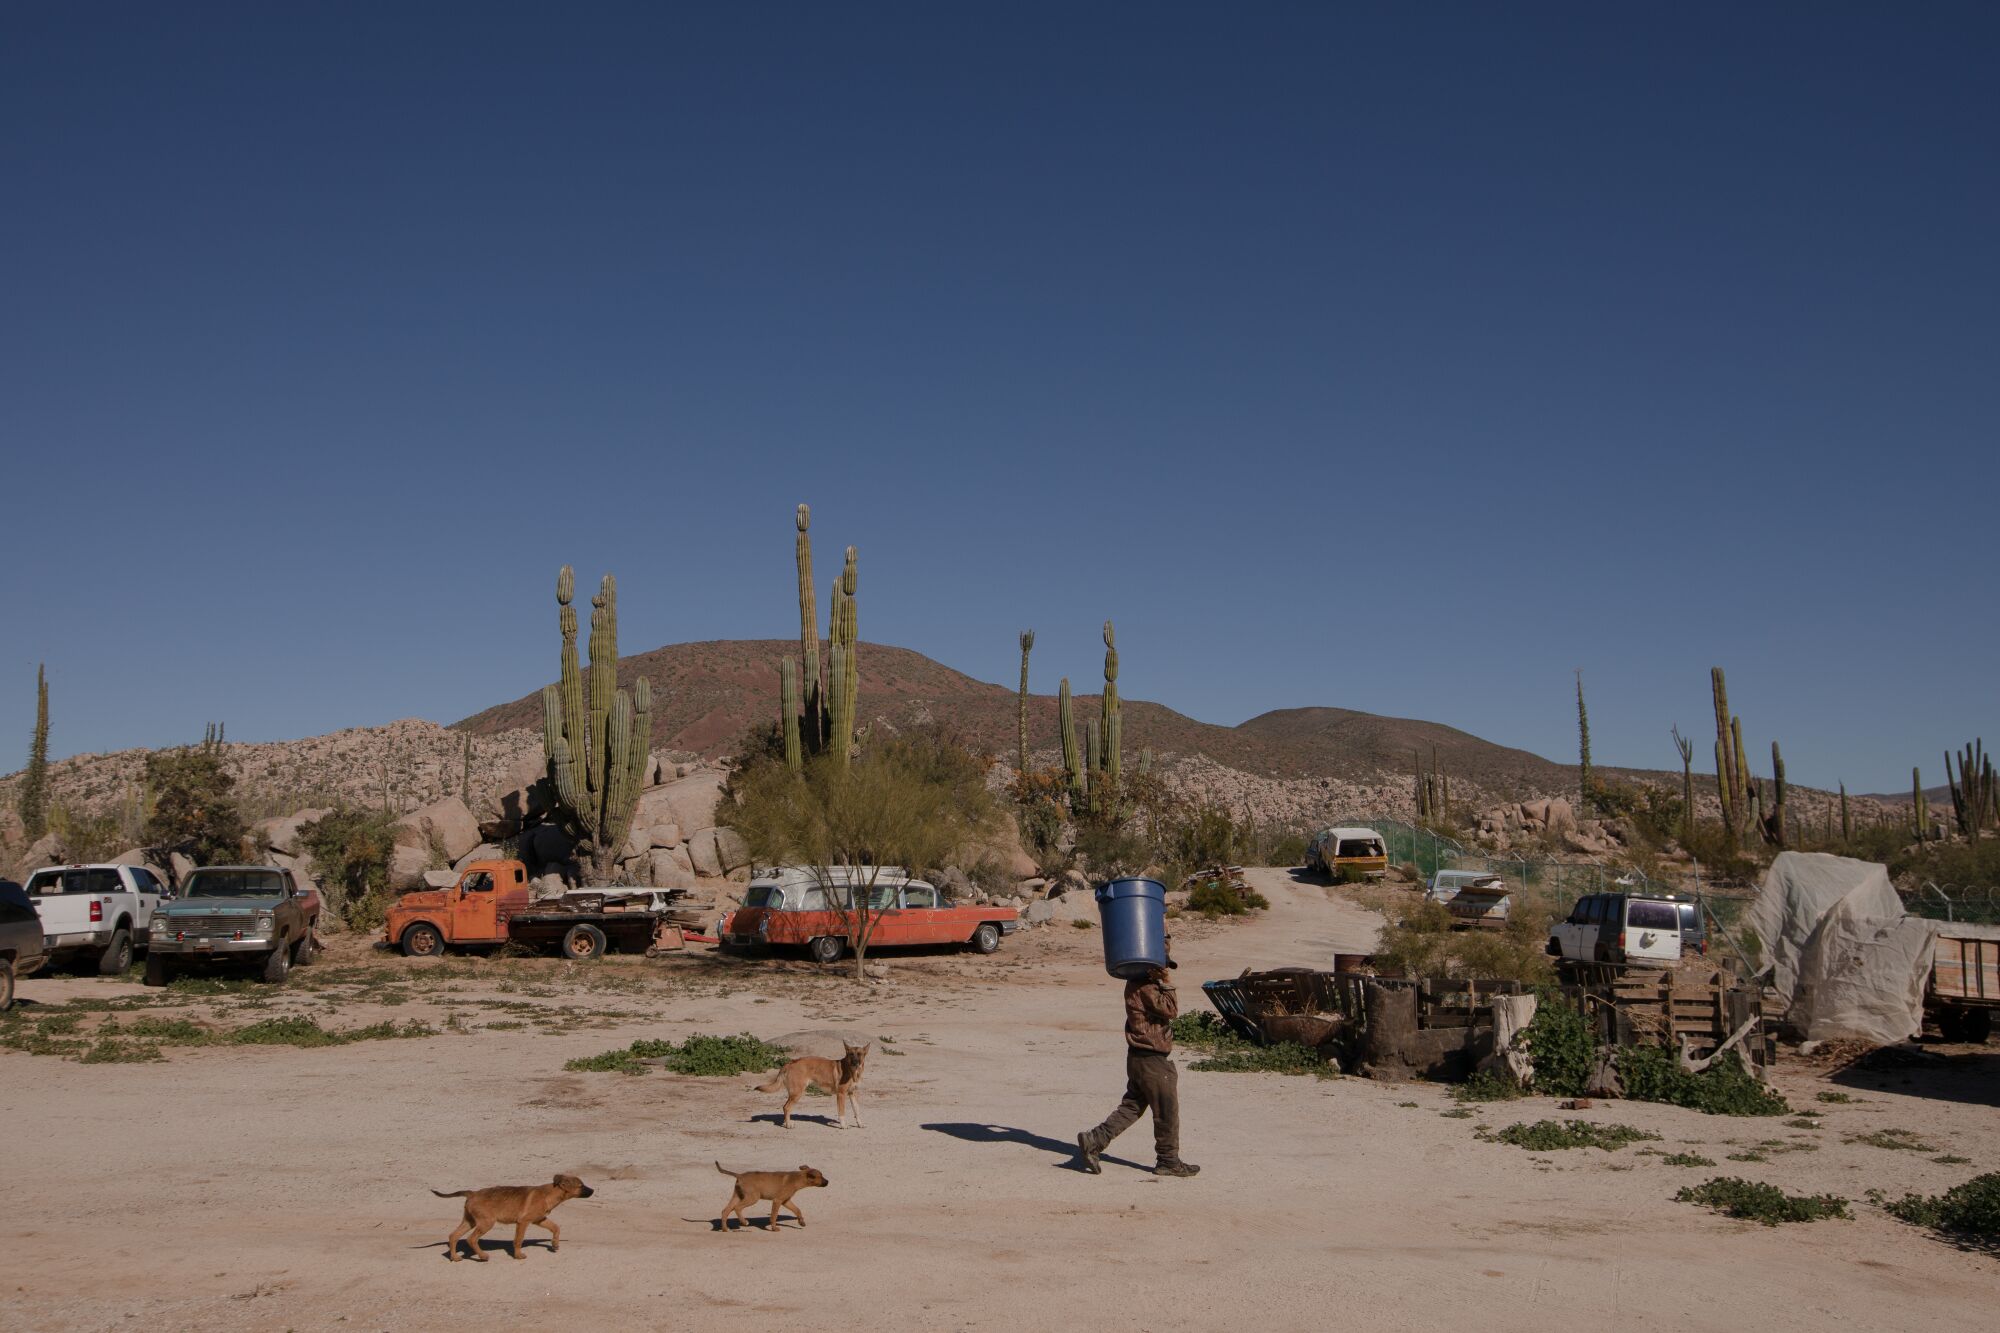 Three dogs following a man as he walks across a dusty lot full of old rusted cars in the desert.